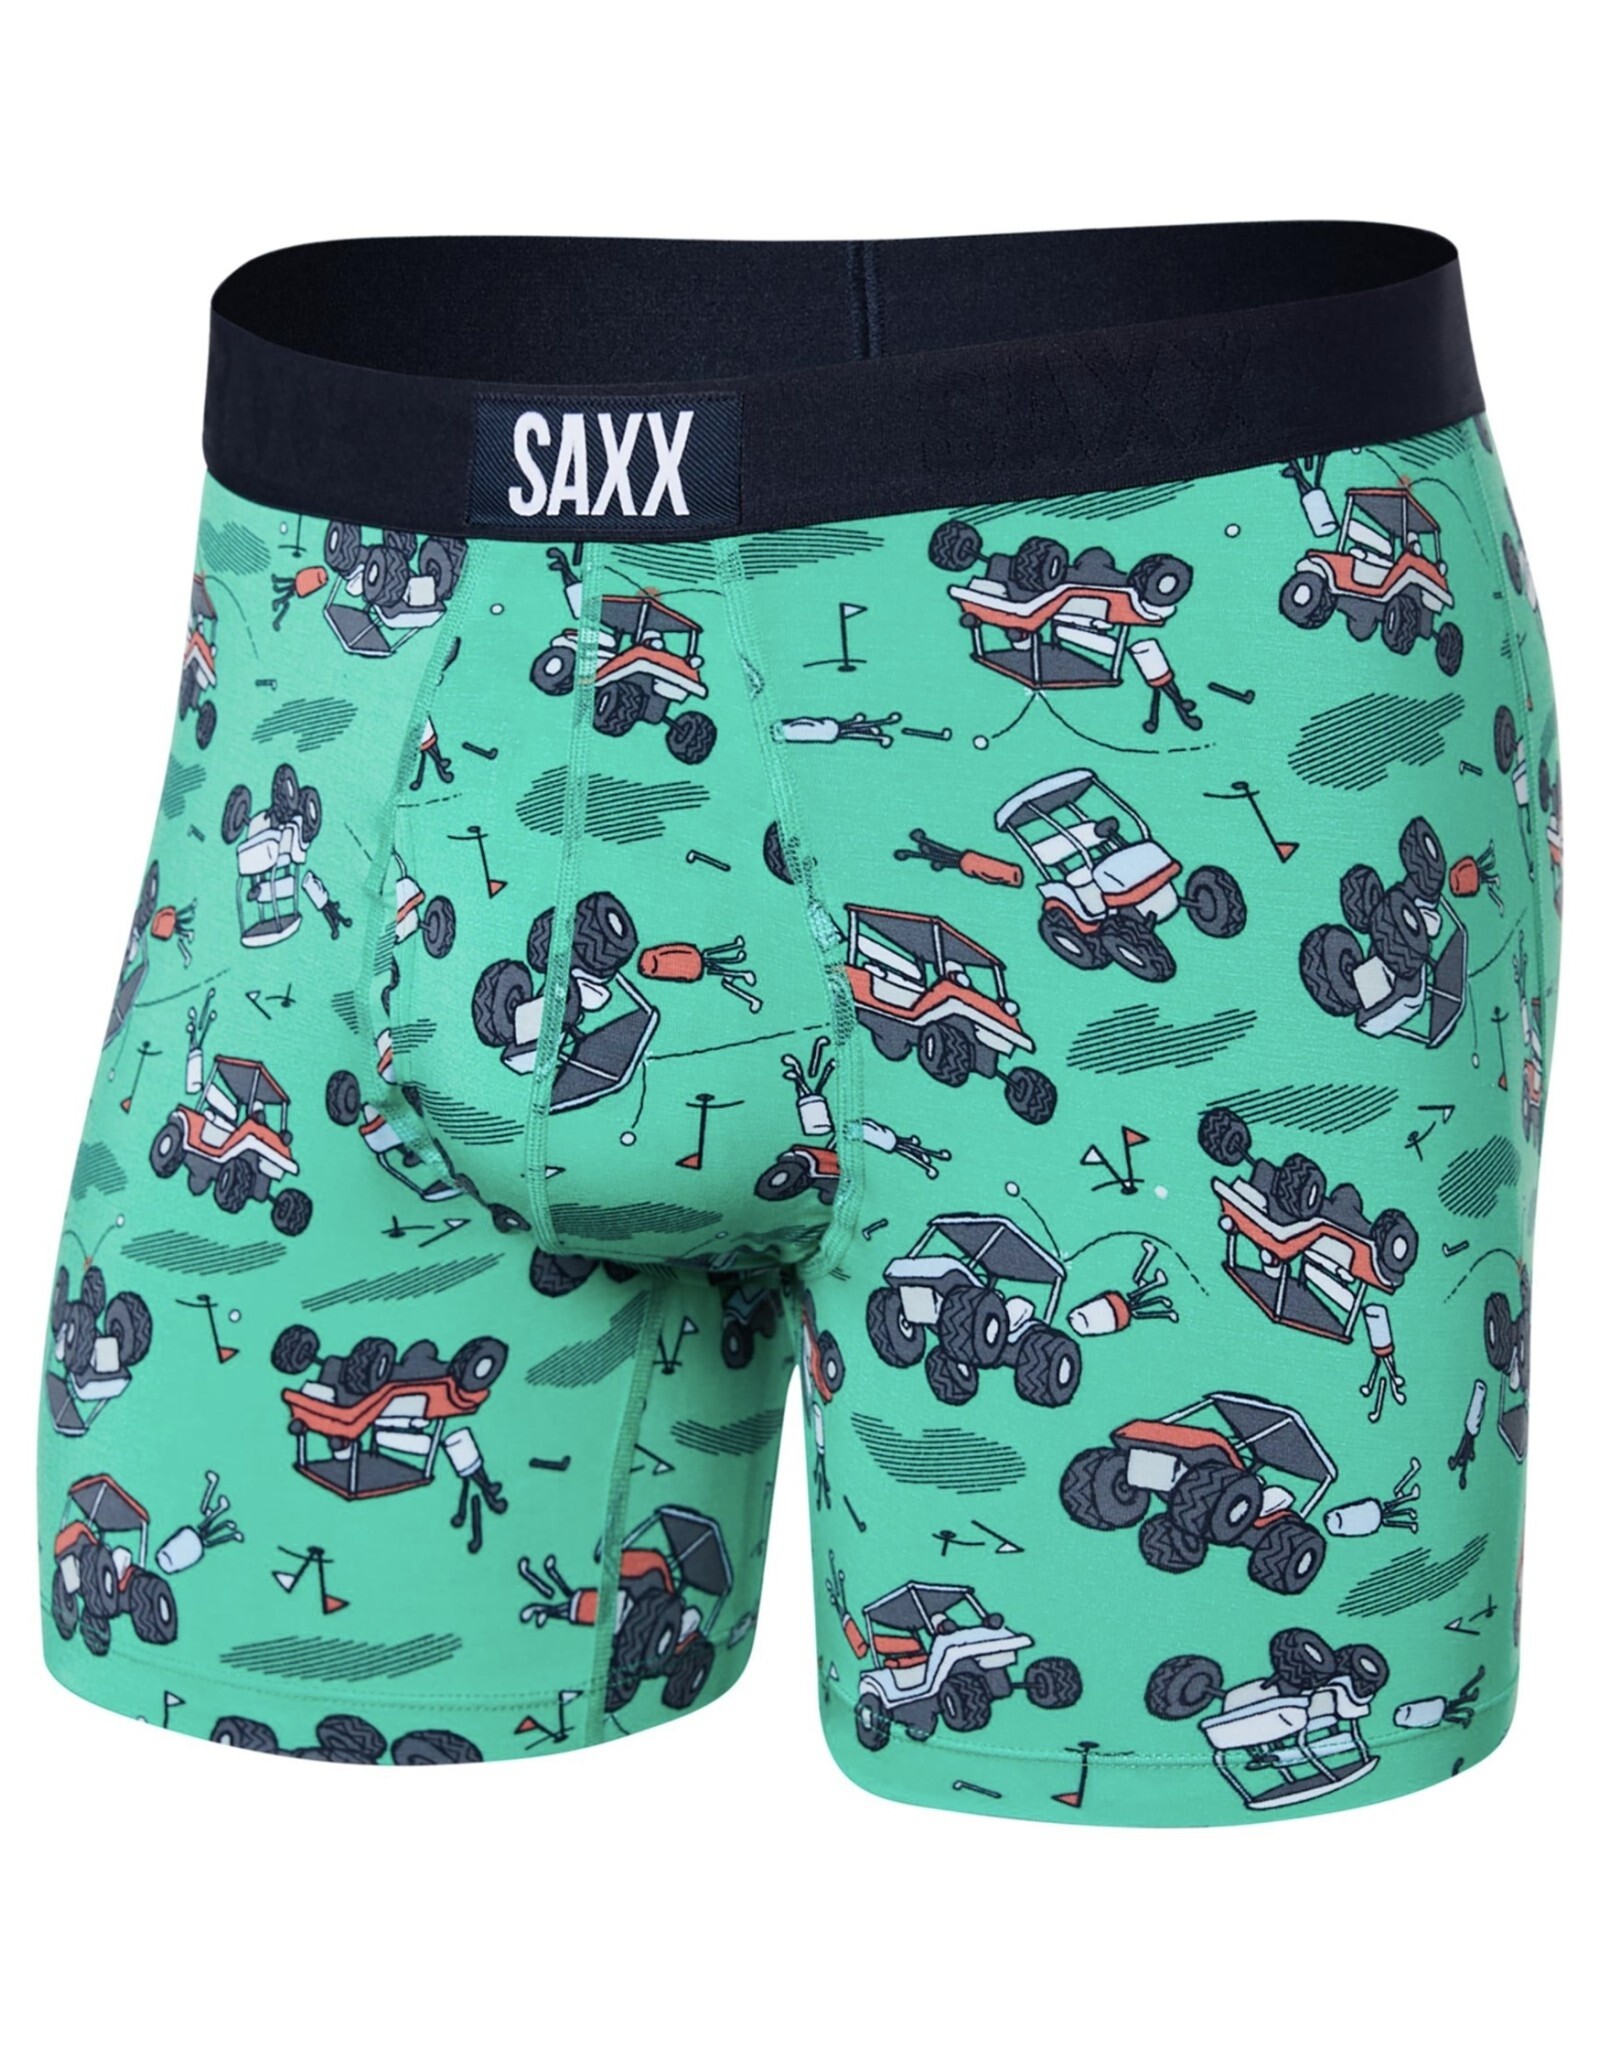  SAXX Men's Underwear - Vibe Super Soft Boxer Brief with  Built-in Pouch Support - Underwear for Men, Fall : Clothing, Shoes & Jewelry